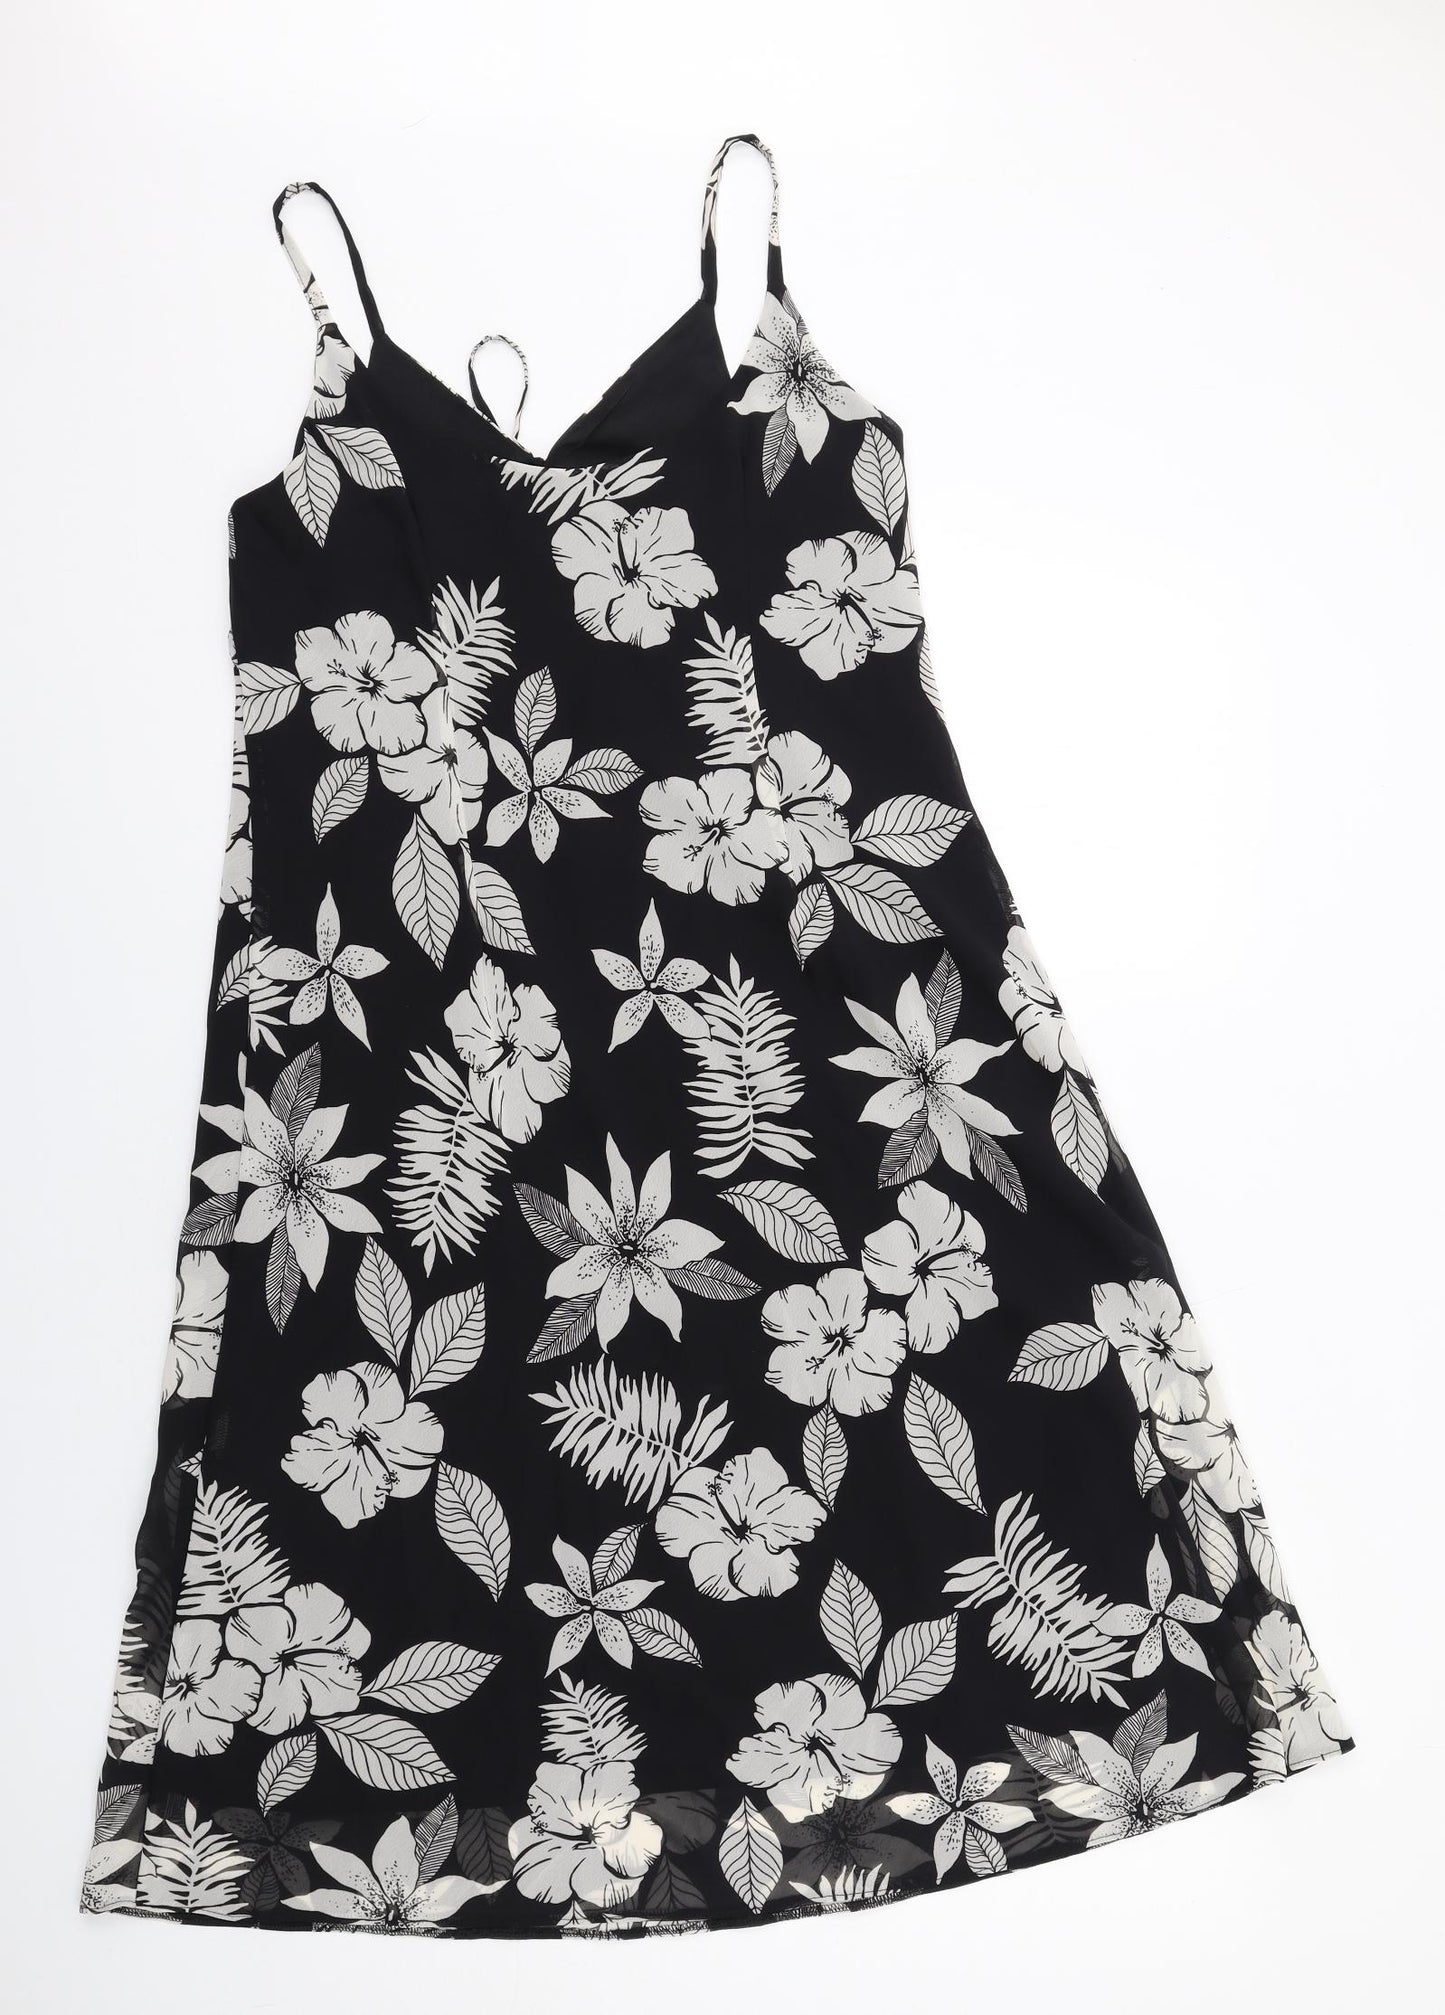 Suzanne Grae Womens Black Floral Polyester Tank Dress Size 14 V-Neck Pullover